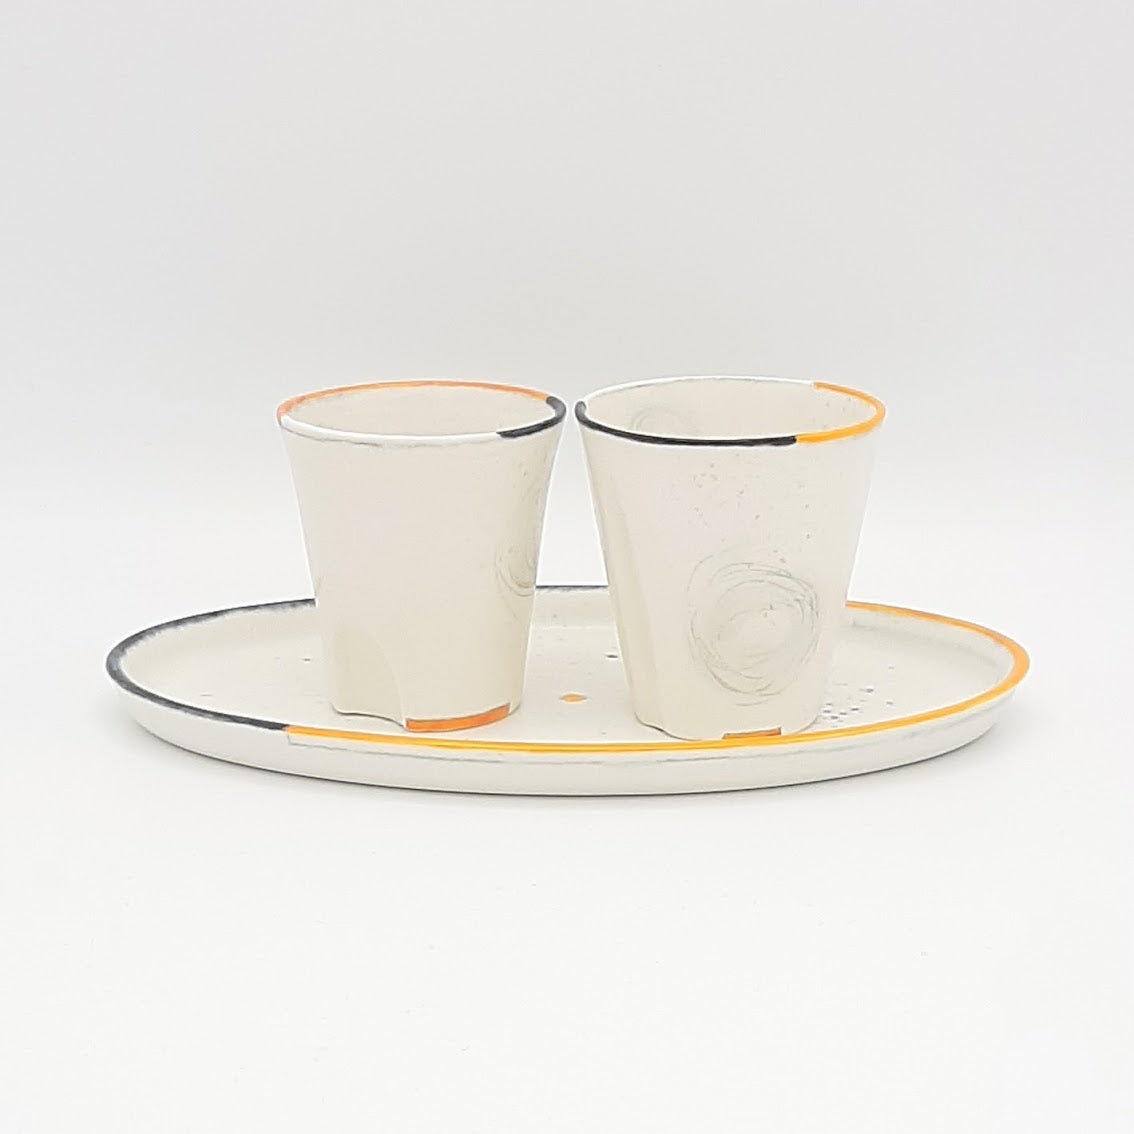 Kaolin - Guðný Magnúsdóttir - The Tea glasses or Espresso cups have each their own character in form and decoration. They are in white porcelain, hand painted individually  with orange and black lines on the edge and come in a set of two.